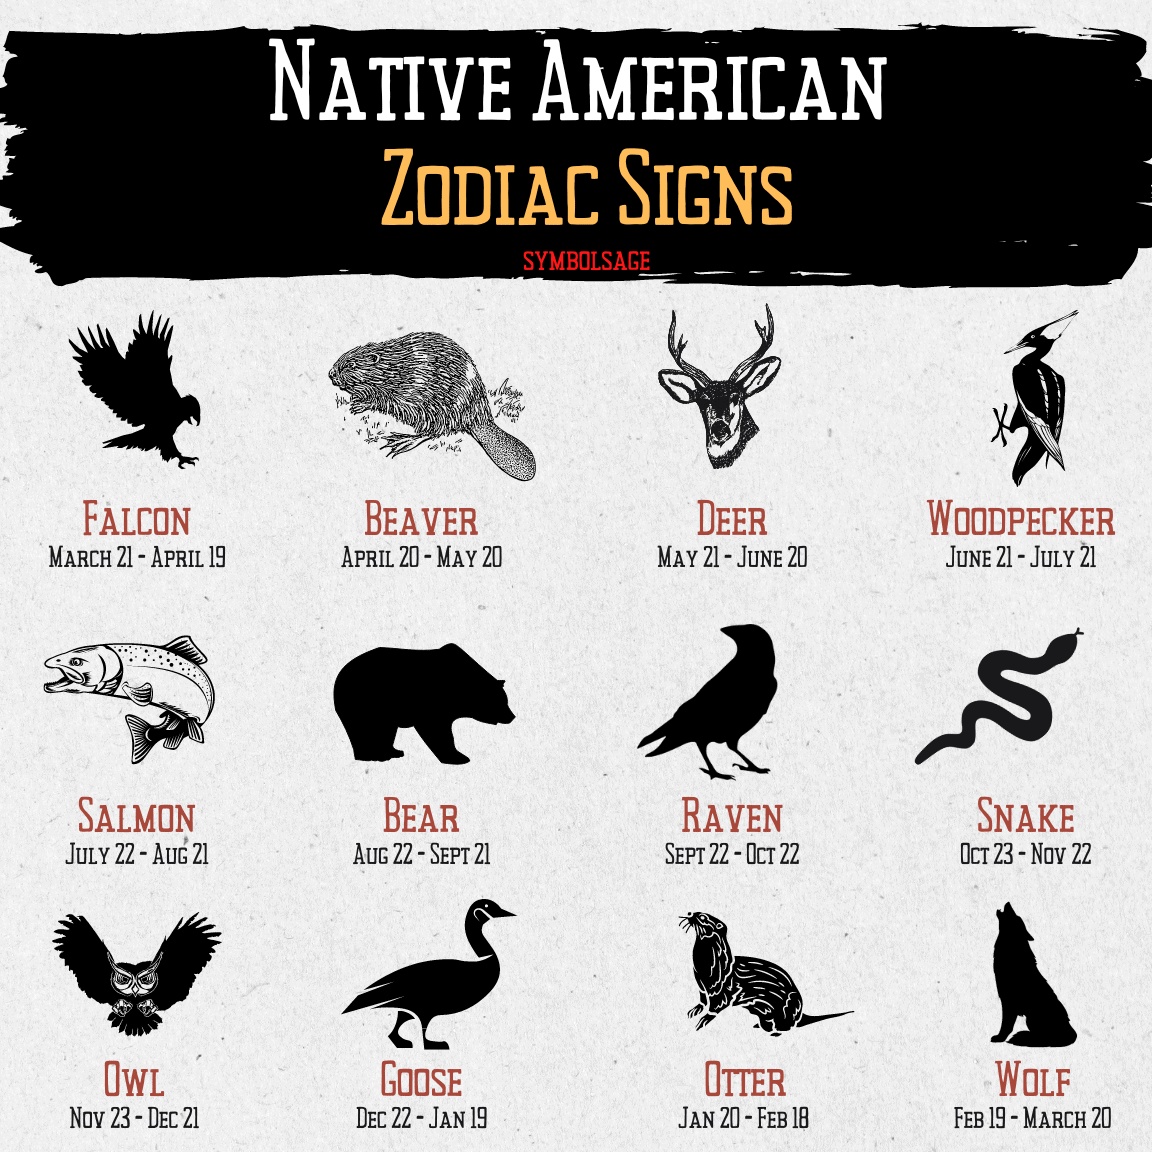 UNDERSTAND BETTER ABOUT YOUR NATIVE AMERICAN ZODIACS SIGNS